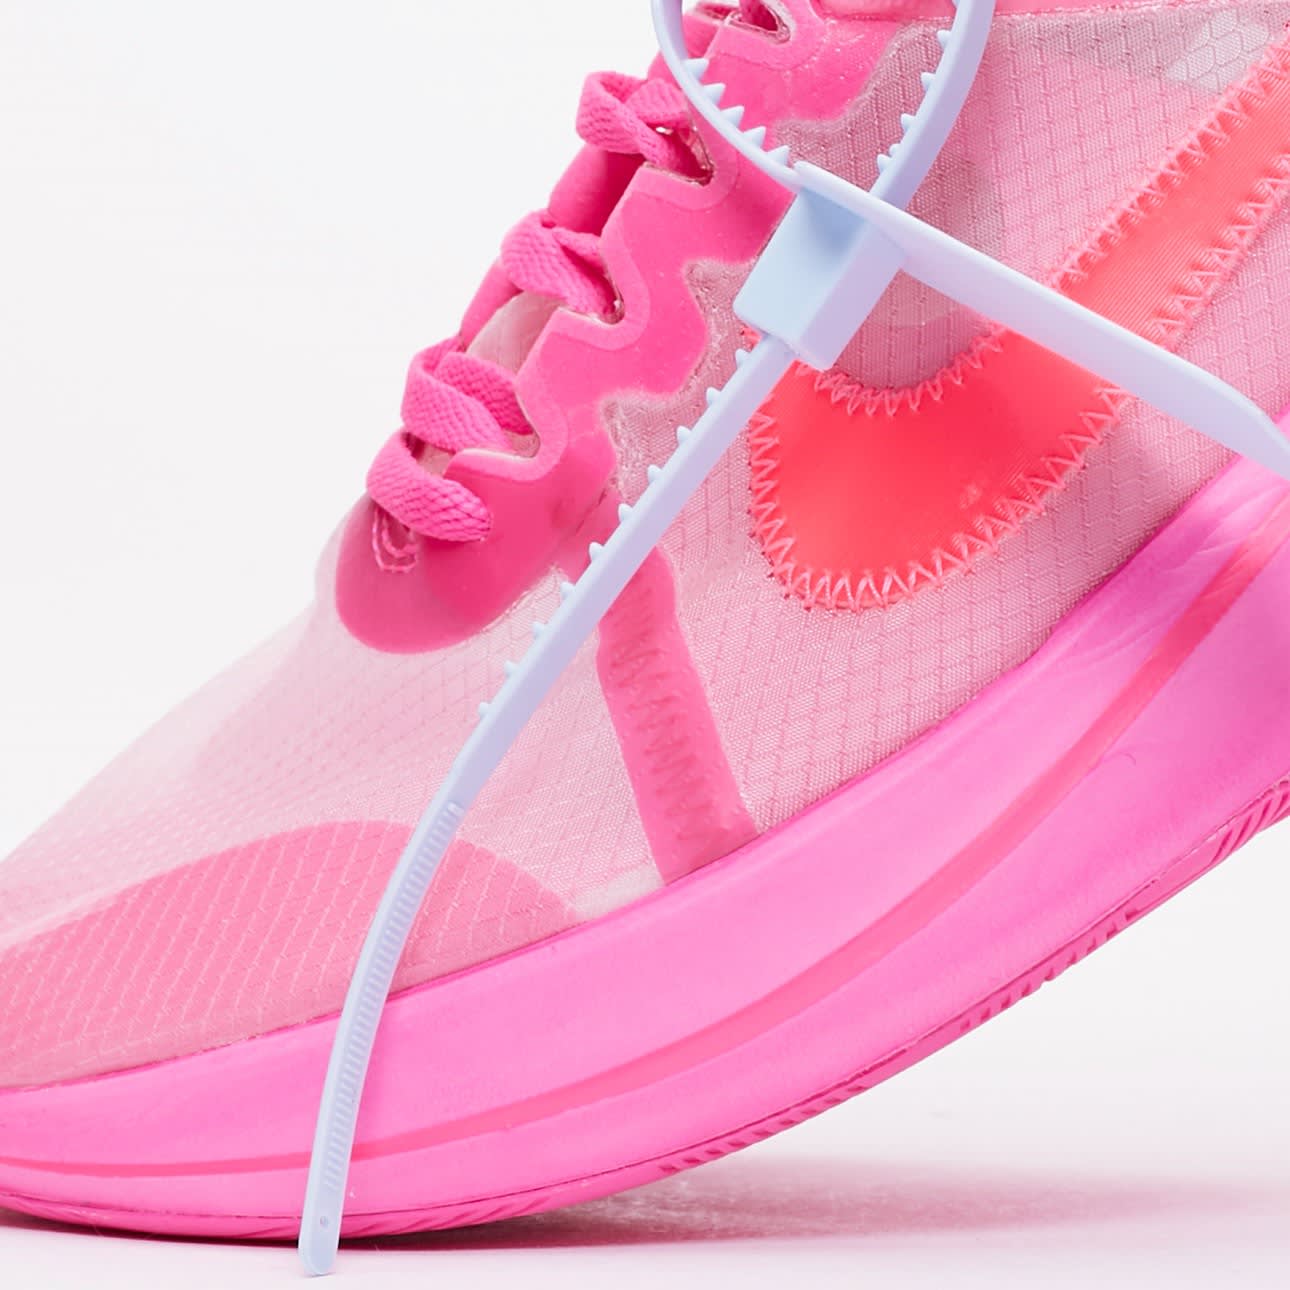 Off-White x Nike Zoom Fly SP AJ4588-600 &#x27;Tulip Pink/Racer Pink&#x27; Release Date